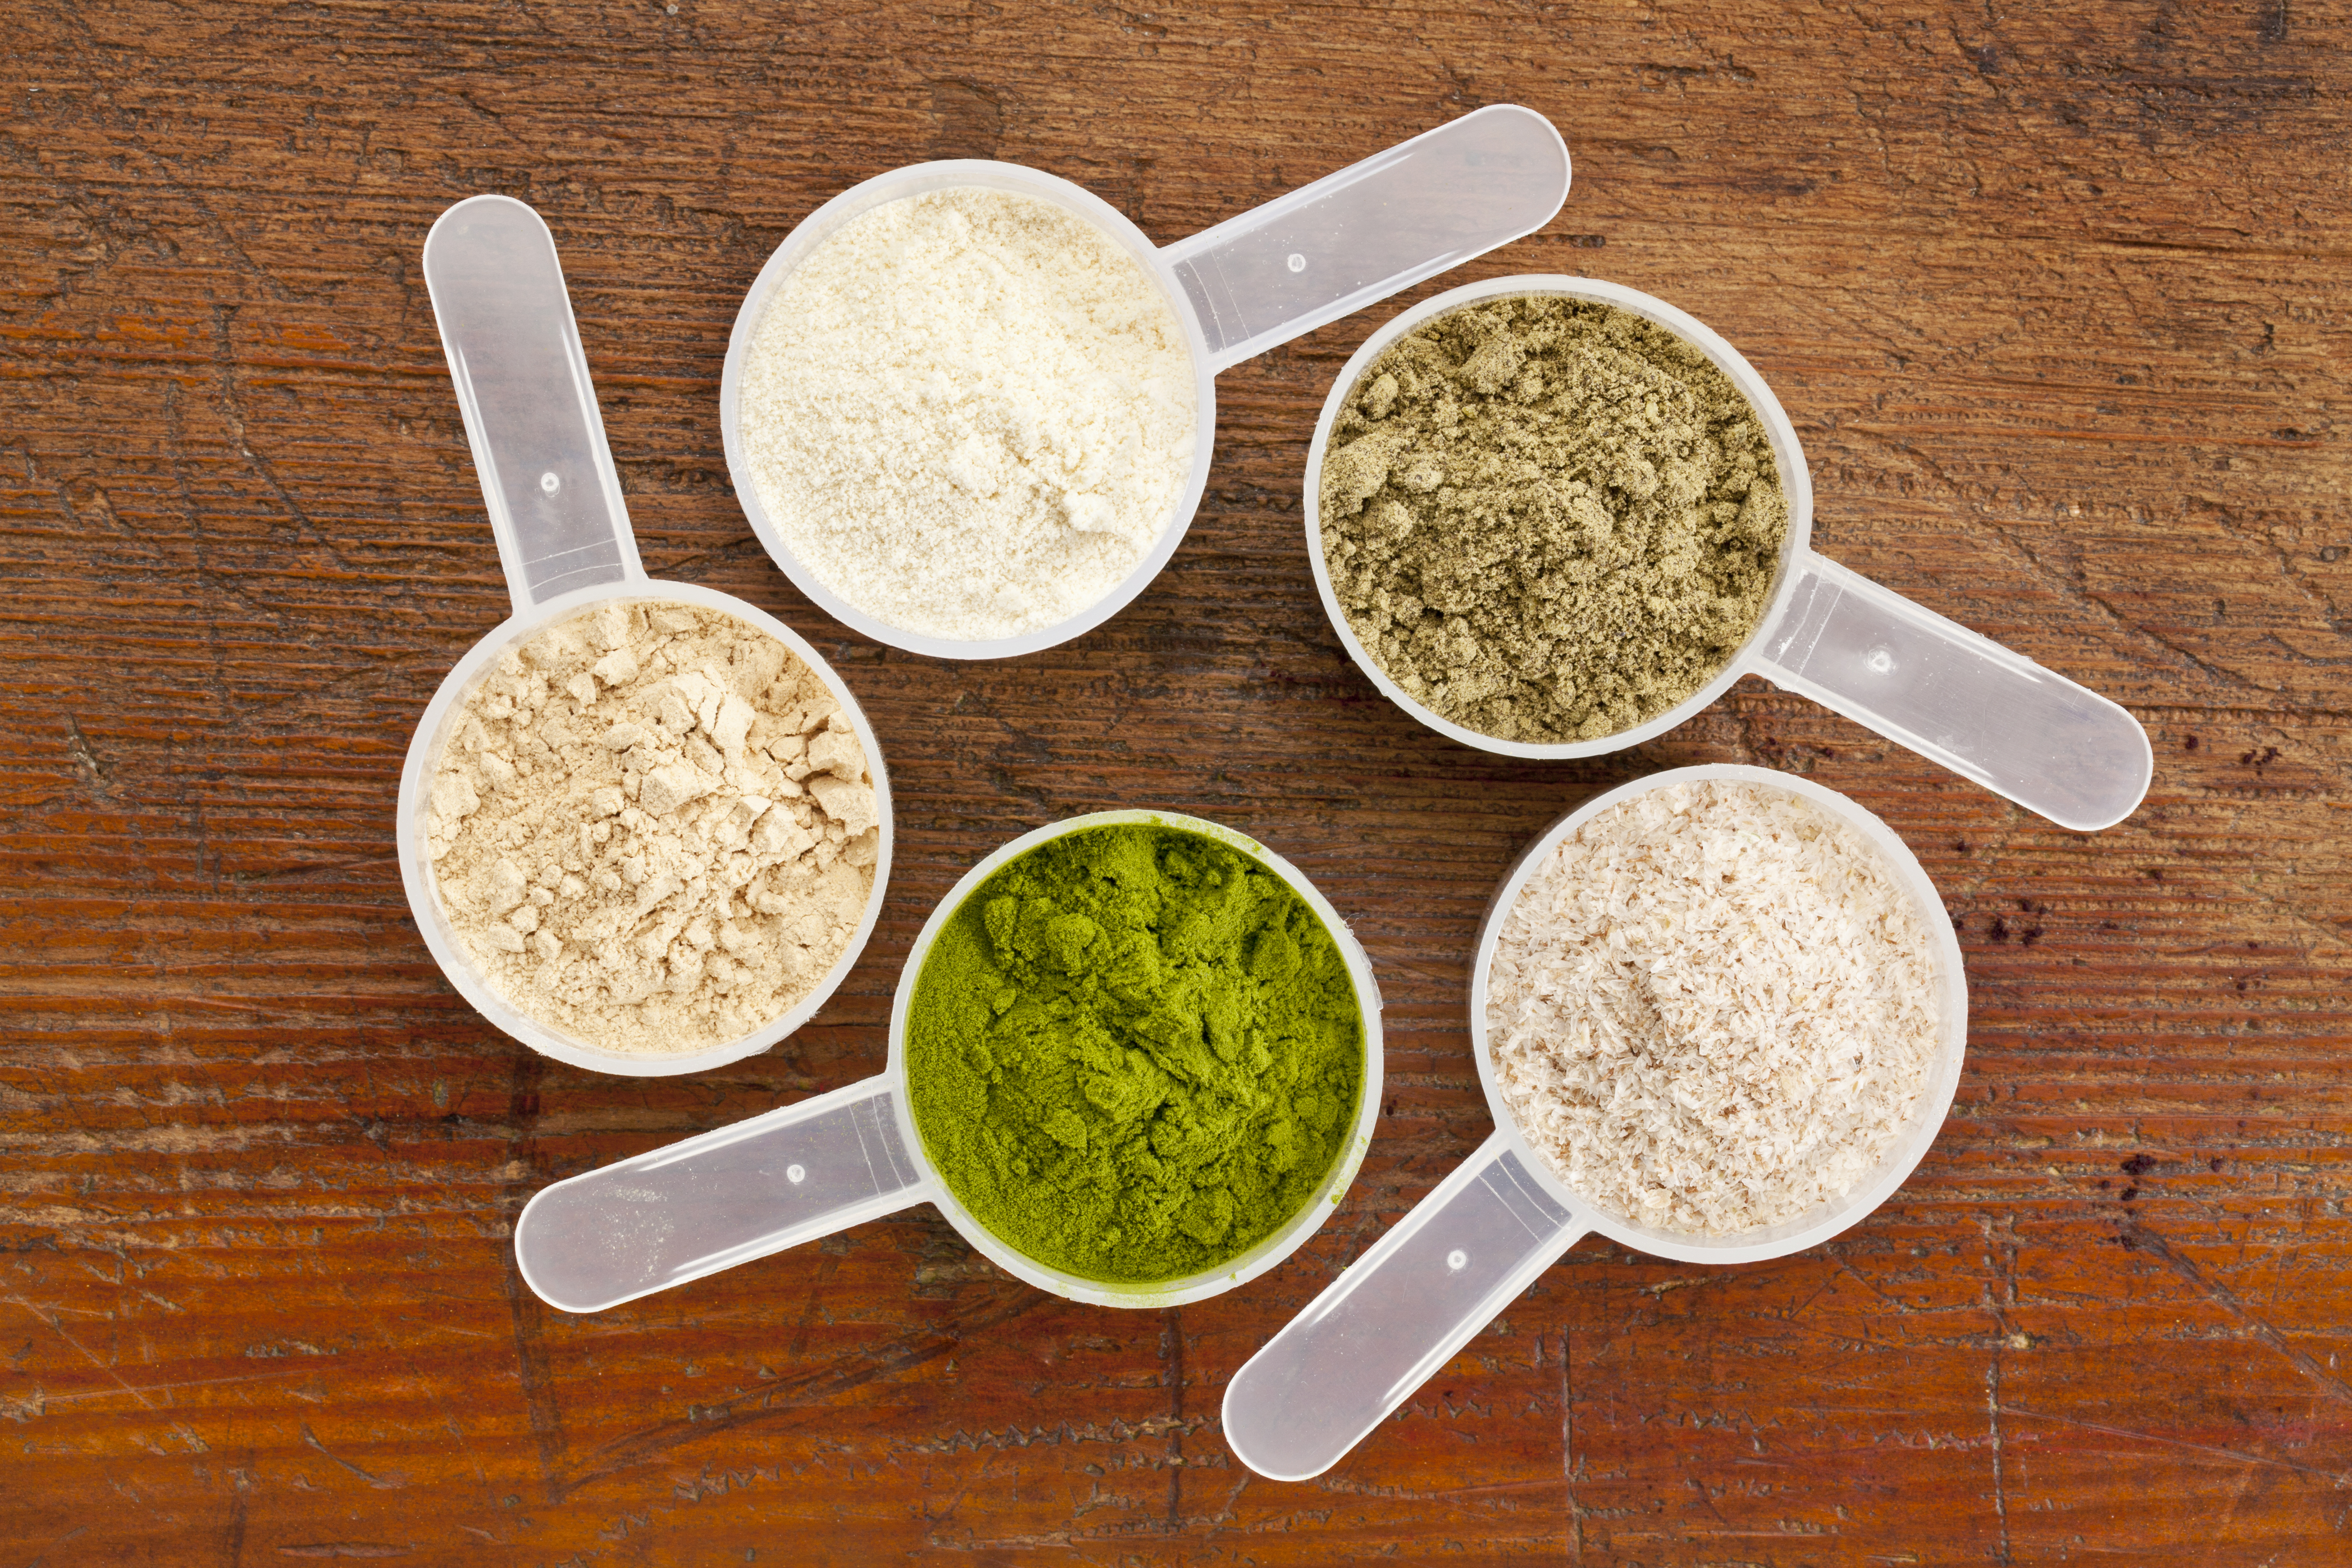 SCOOPS OF DIFFERENT POWDER PROTEIN